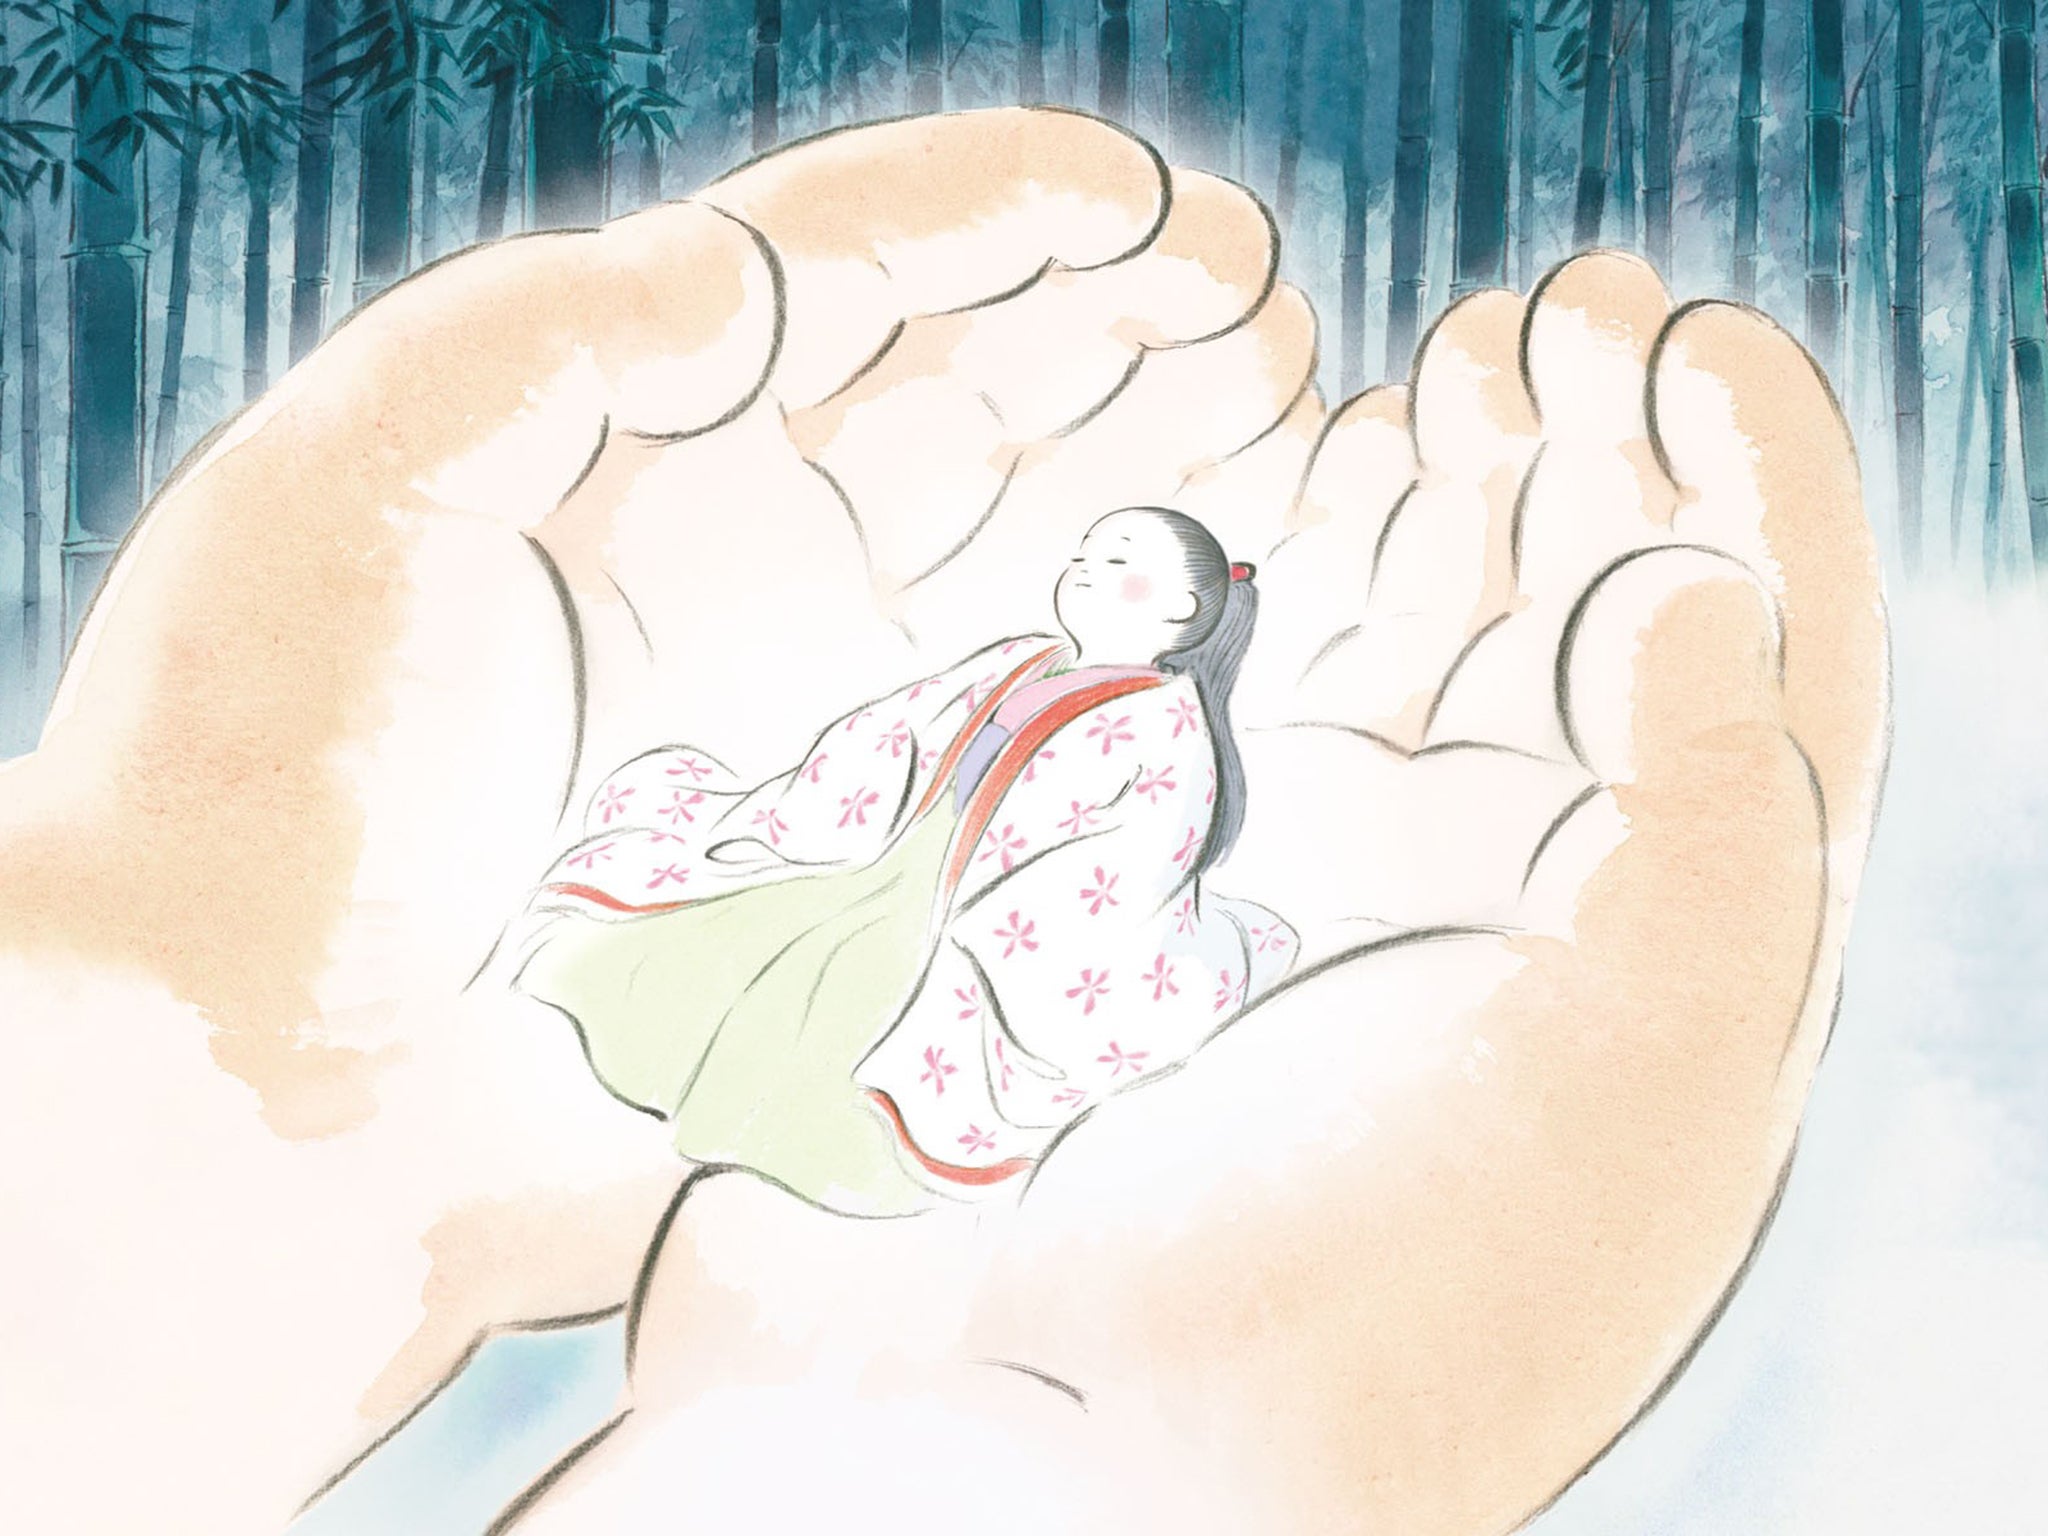 Takahata was known for using a pale and watery colour palette, as in ‘The Tale of the Princess Kaguya’